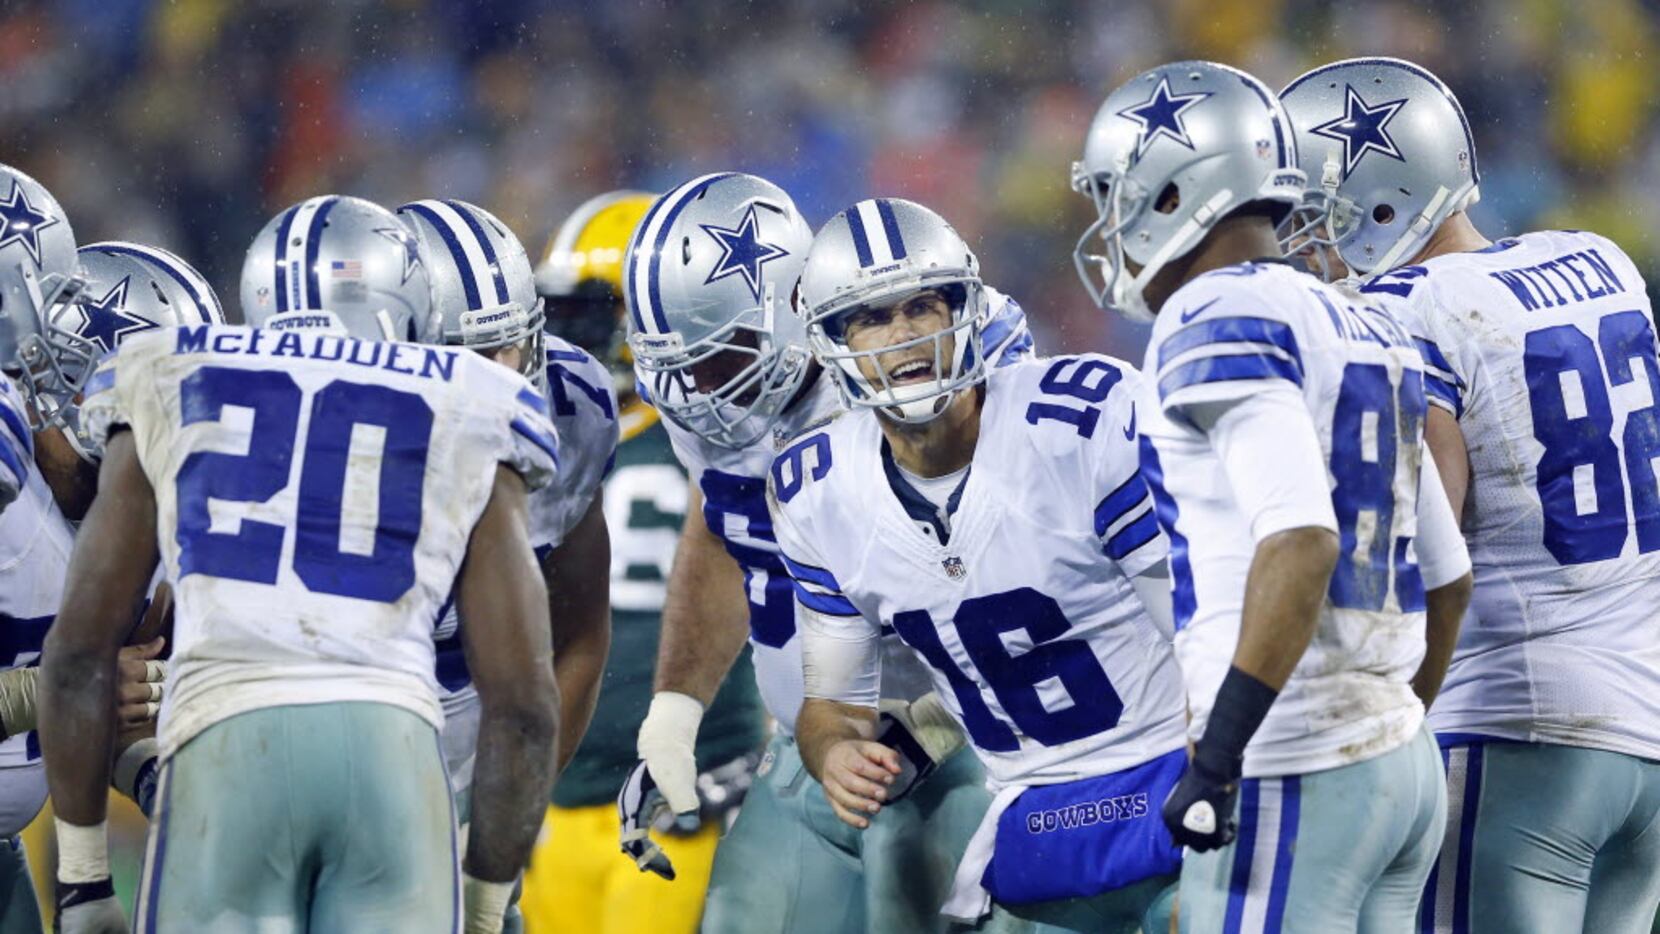 Dallas Cowboys on CBS Sports - What do you think the Dallas